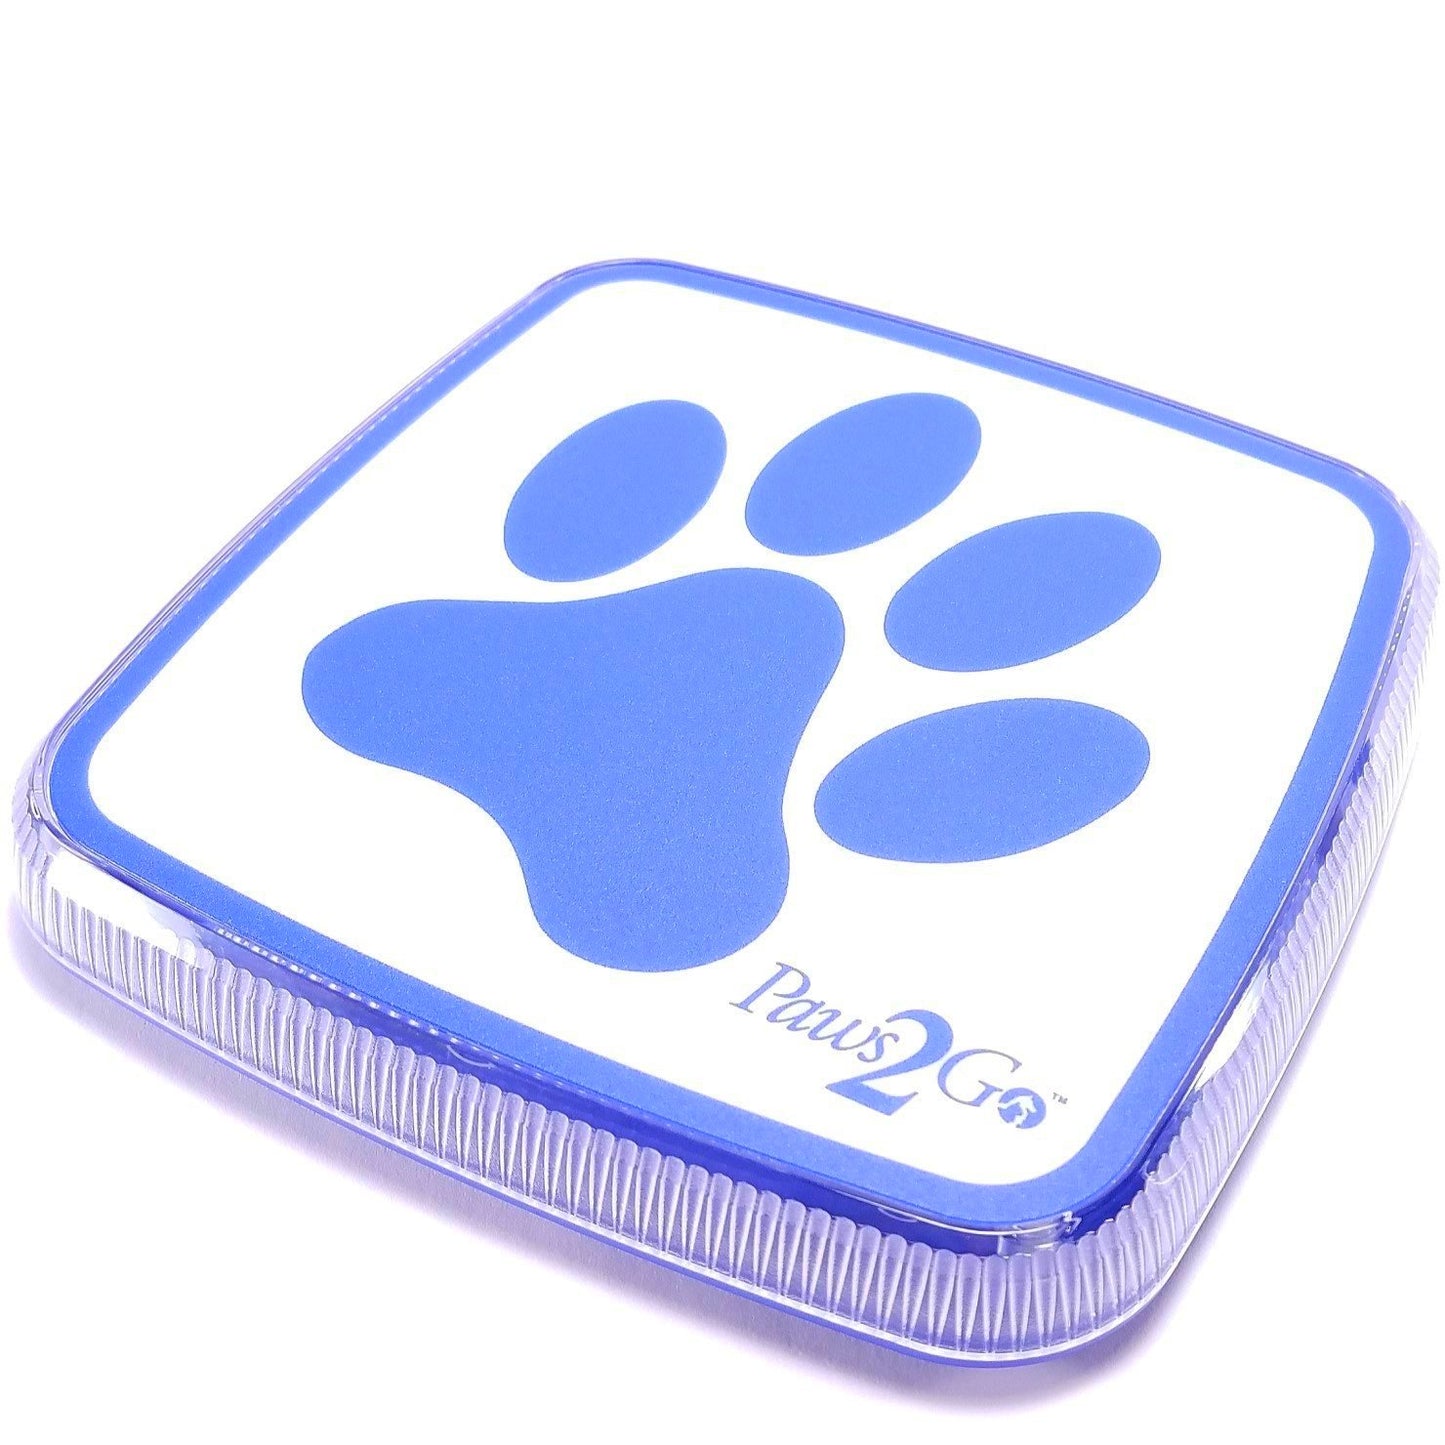 Top view of the Paws2Go product for housetraining your dog